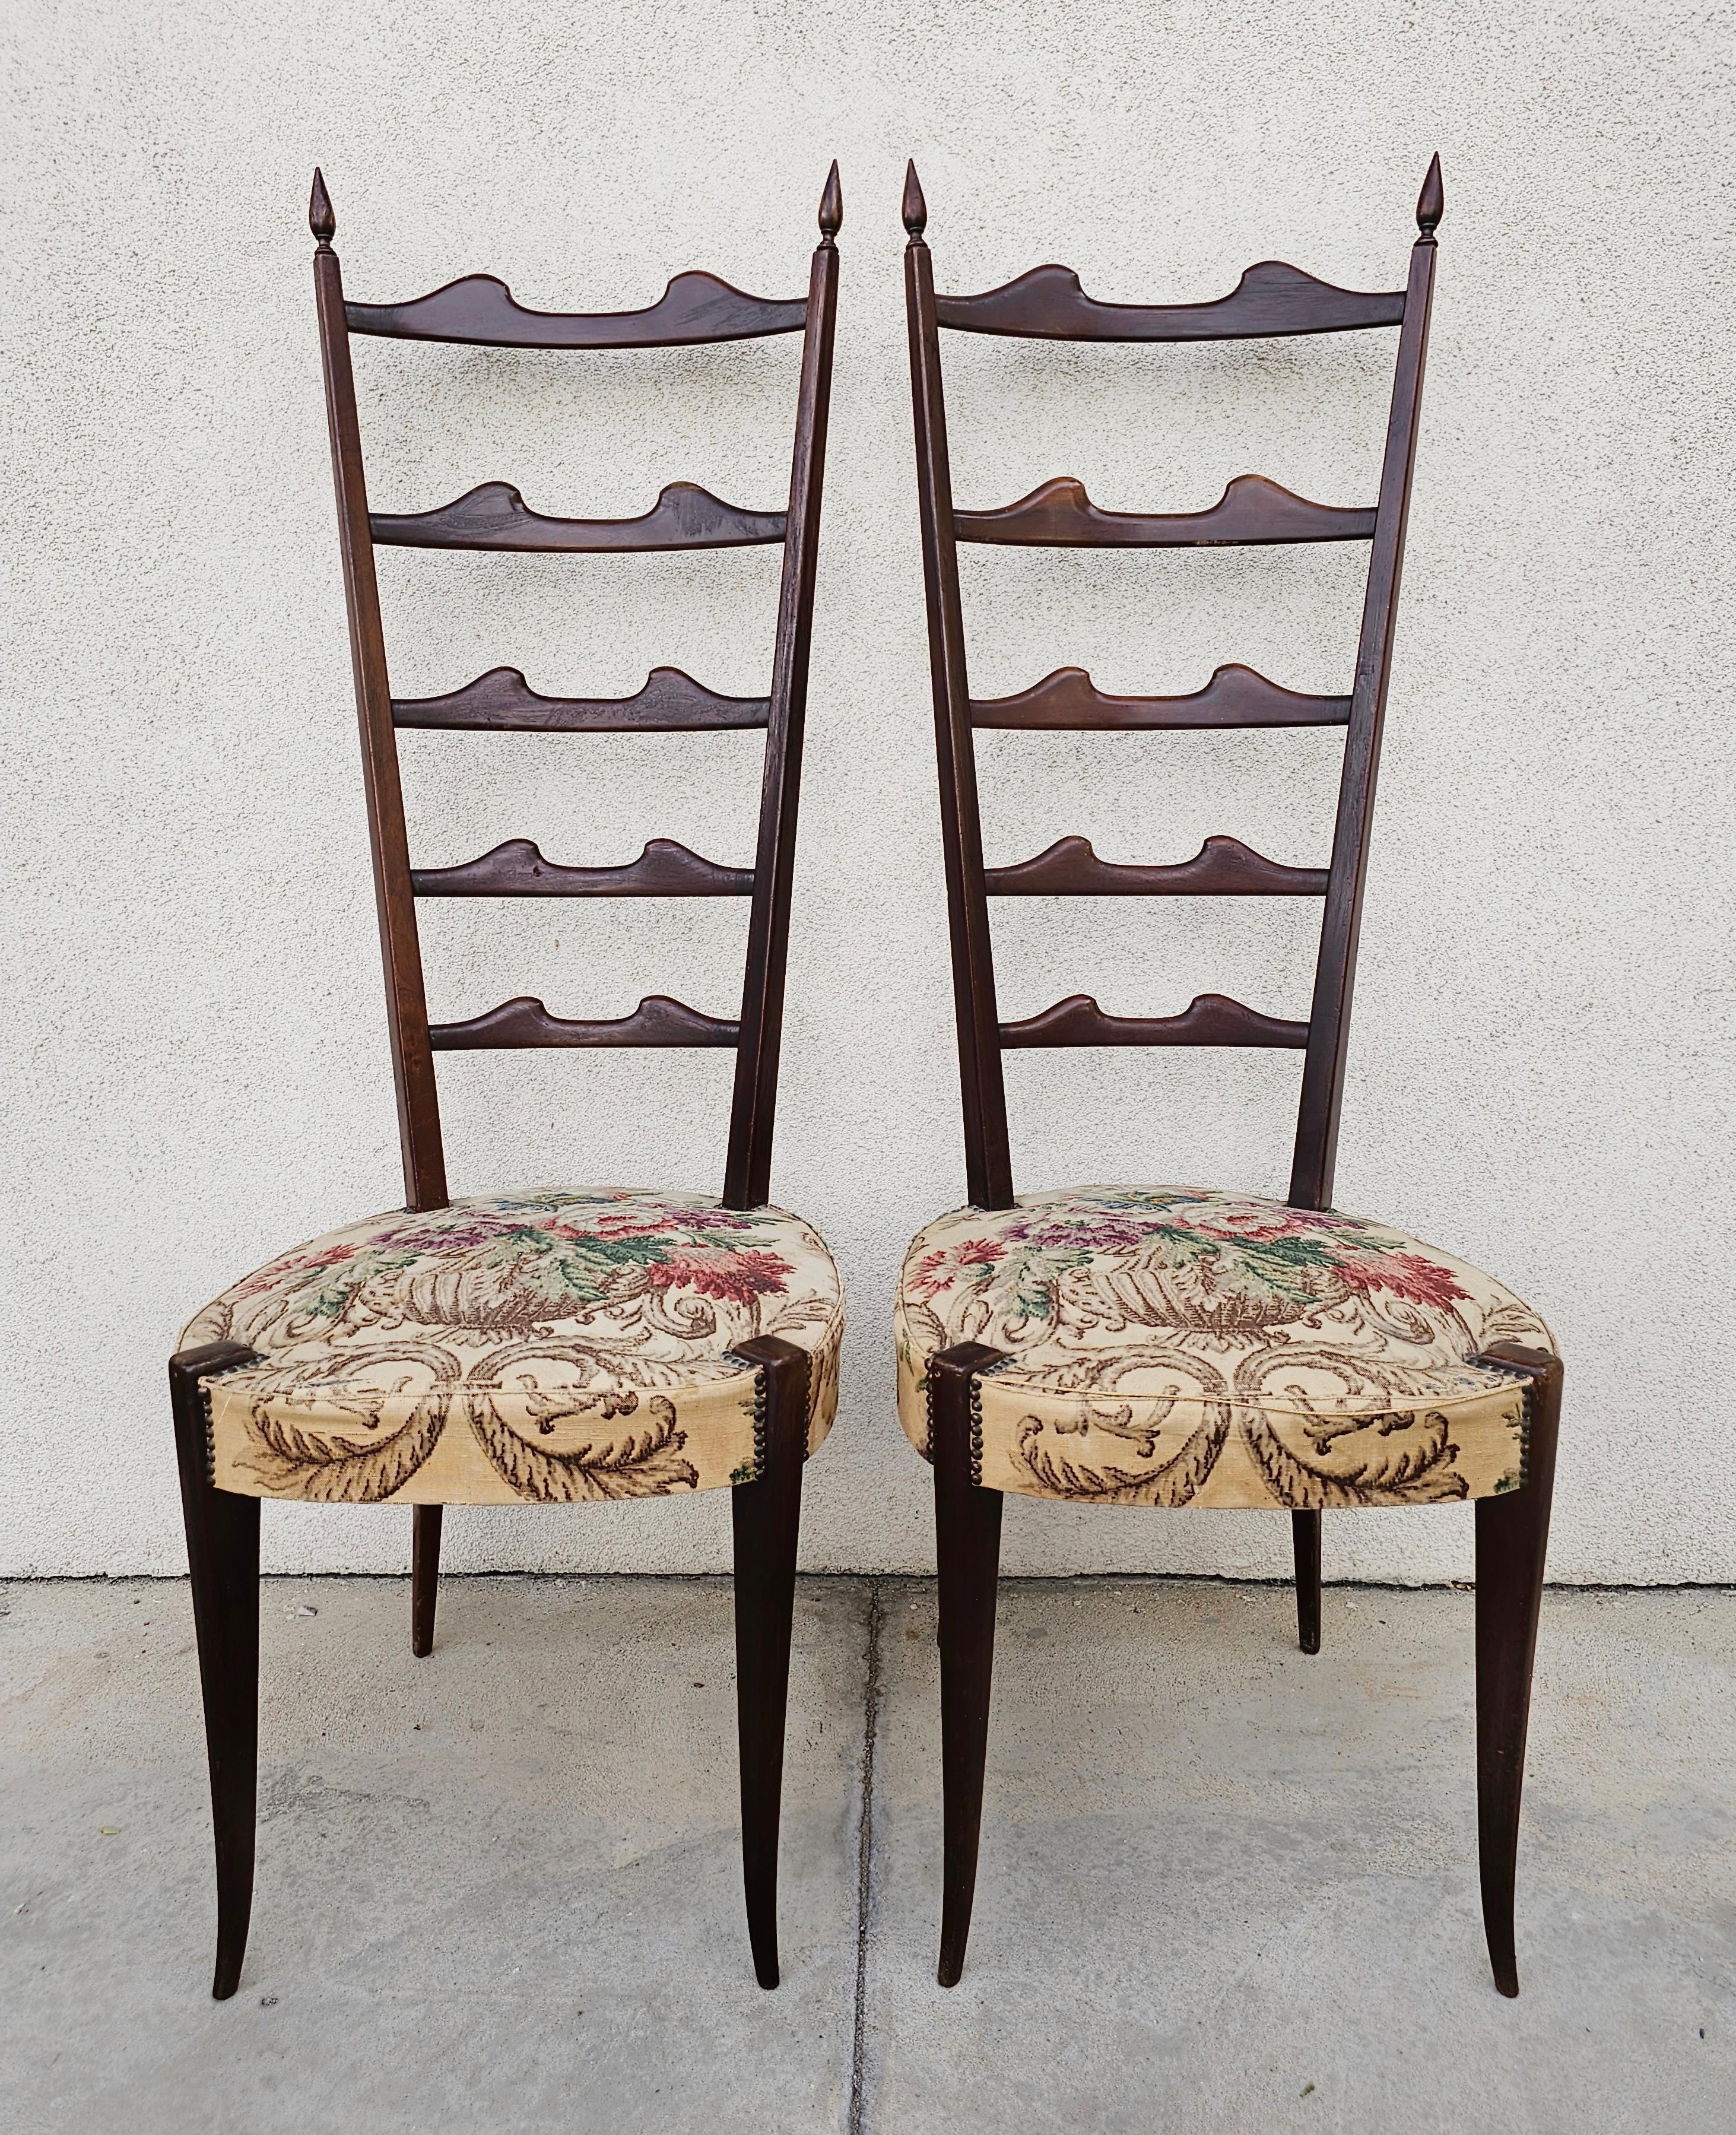 In this listing you will find a pair of Mid Century Modern High Backrest Chairs attr. to Italian star of design, Paolo Buffa. The chairs are done in dark wood, most likely mahogany and upholstered with a floral fabric, which has suffered some